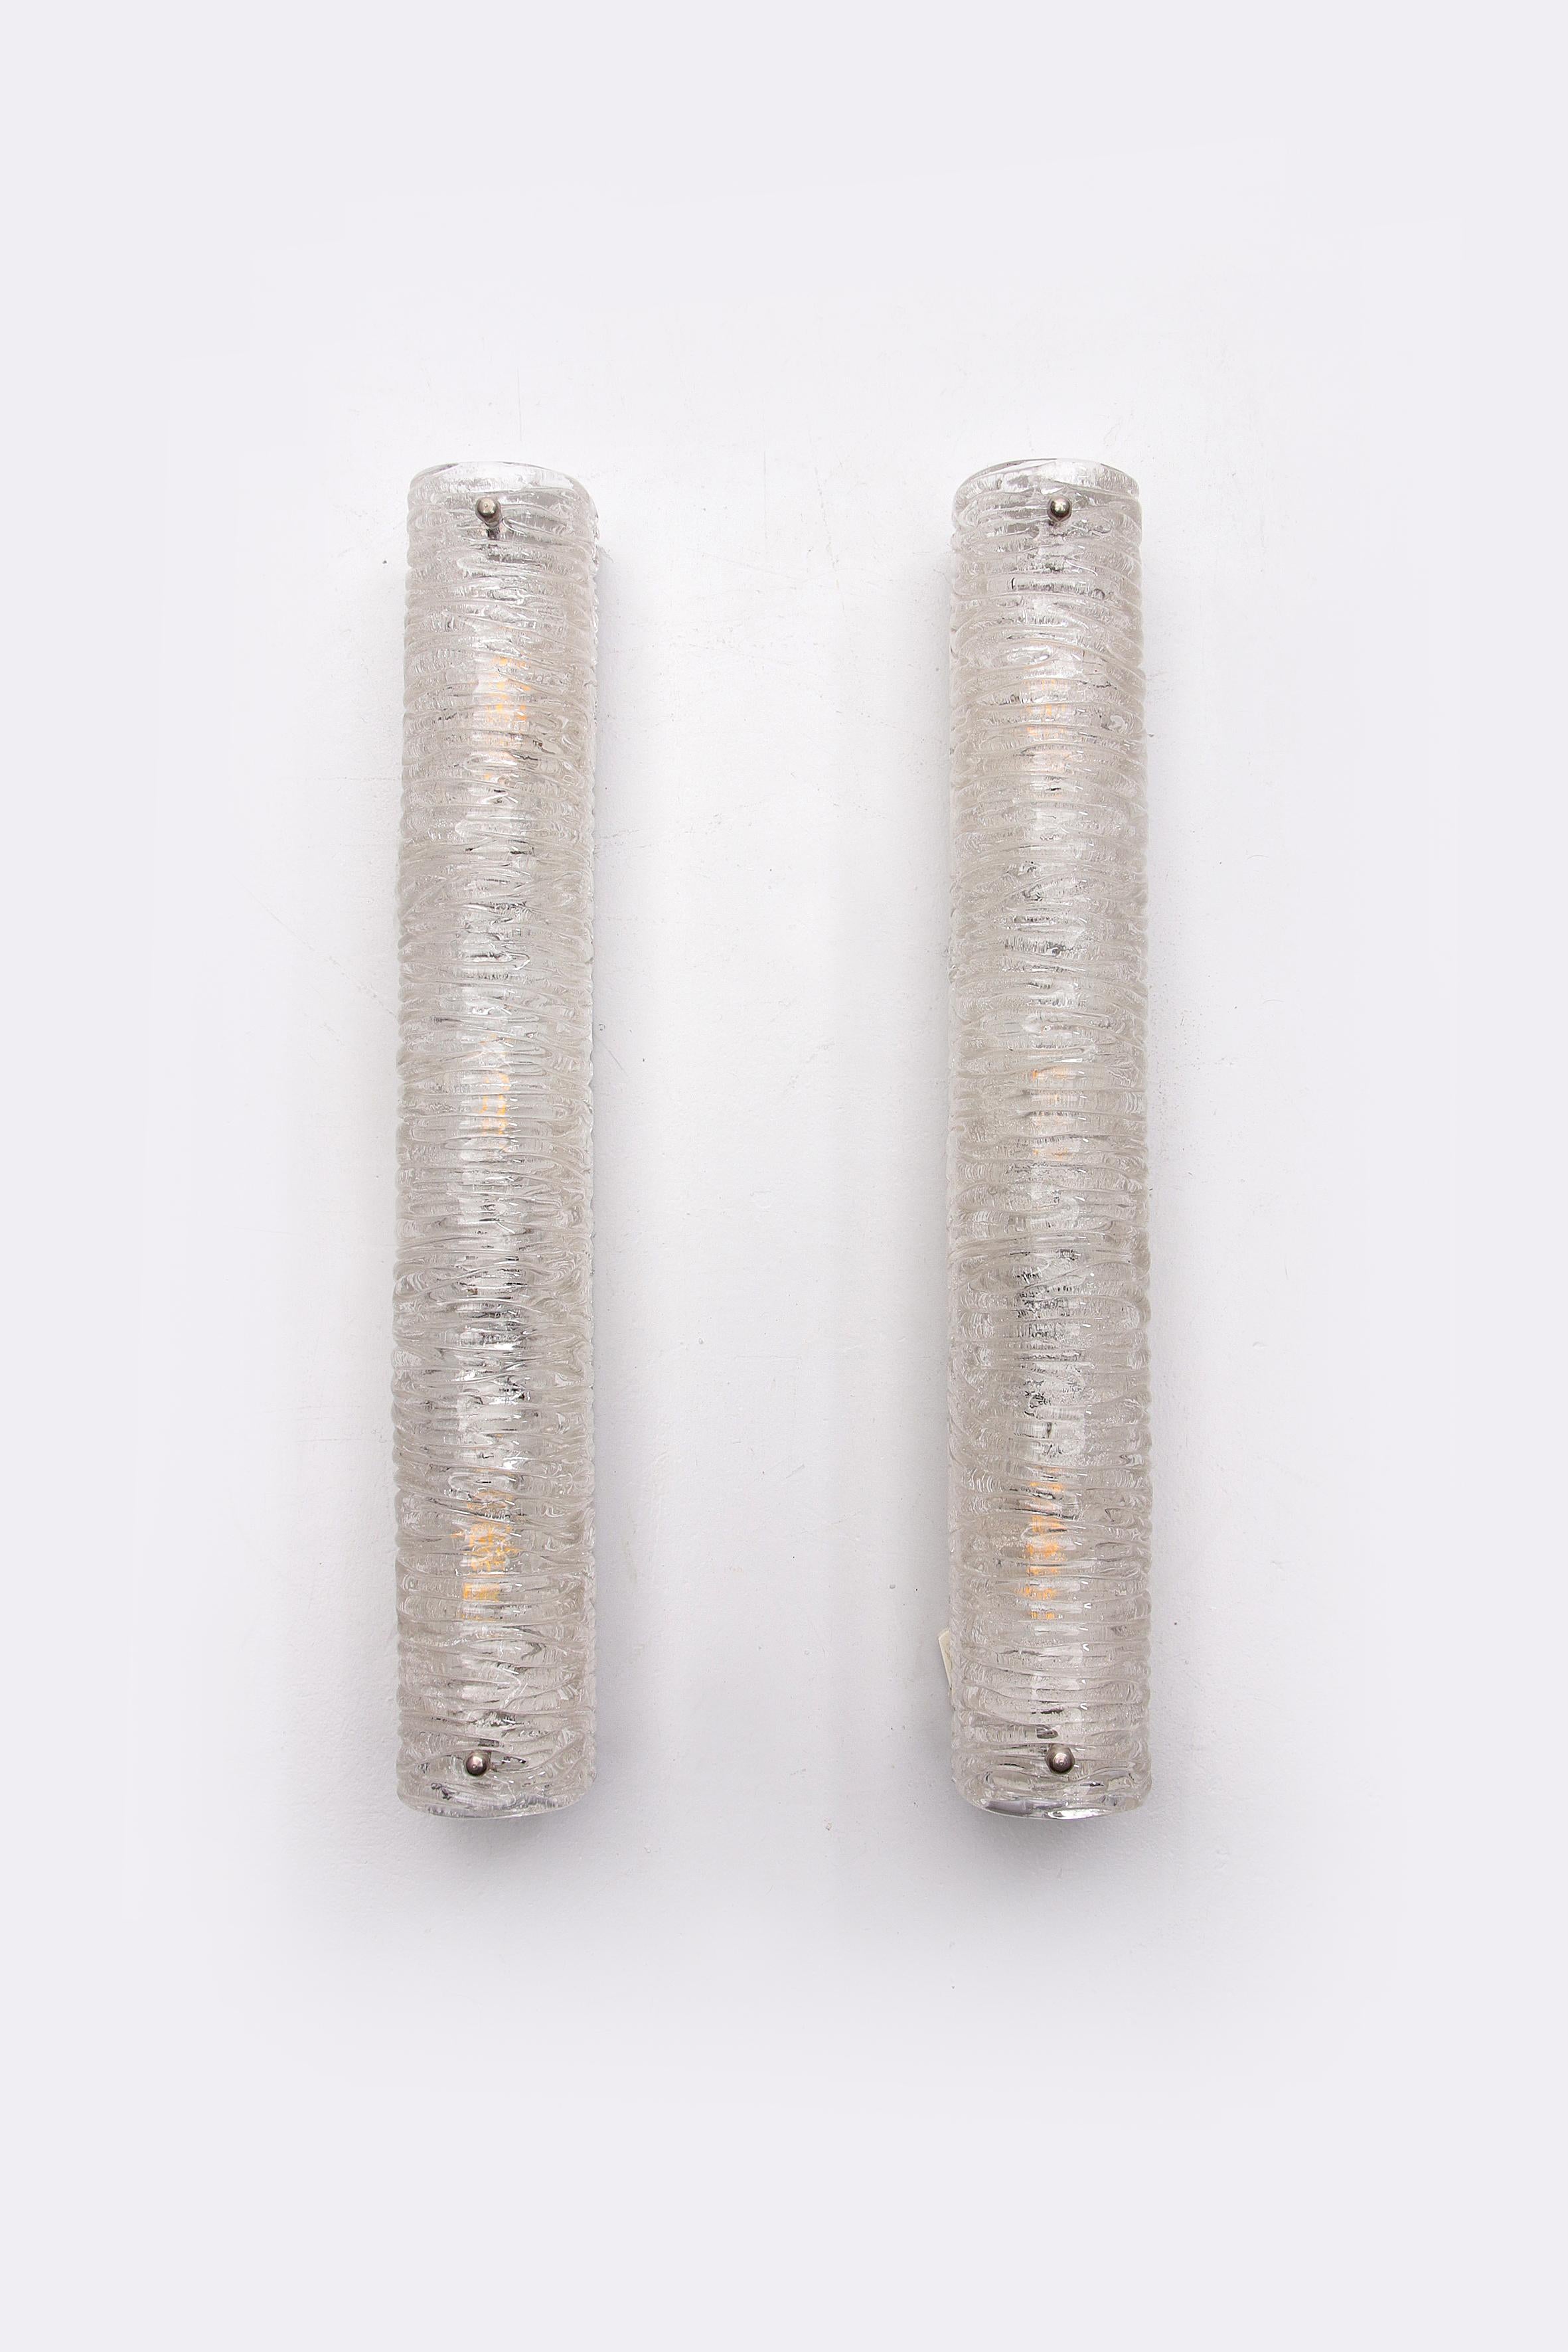 Set Elongated wall lamps by Honsel Leuchten with bubble glass, 1960.


These are wall lamps by Hondsel Leuchten made in Germany around 1960.

Honsel Leuchten wall lamp with ice glass from the 1960s.
In good working condition.
Beautiful in the